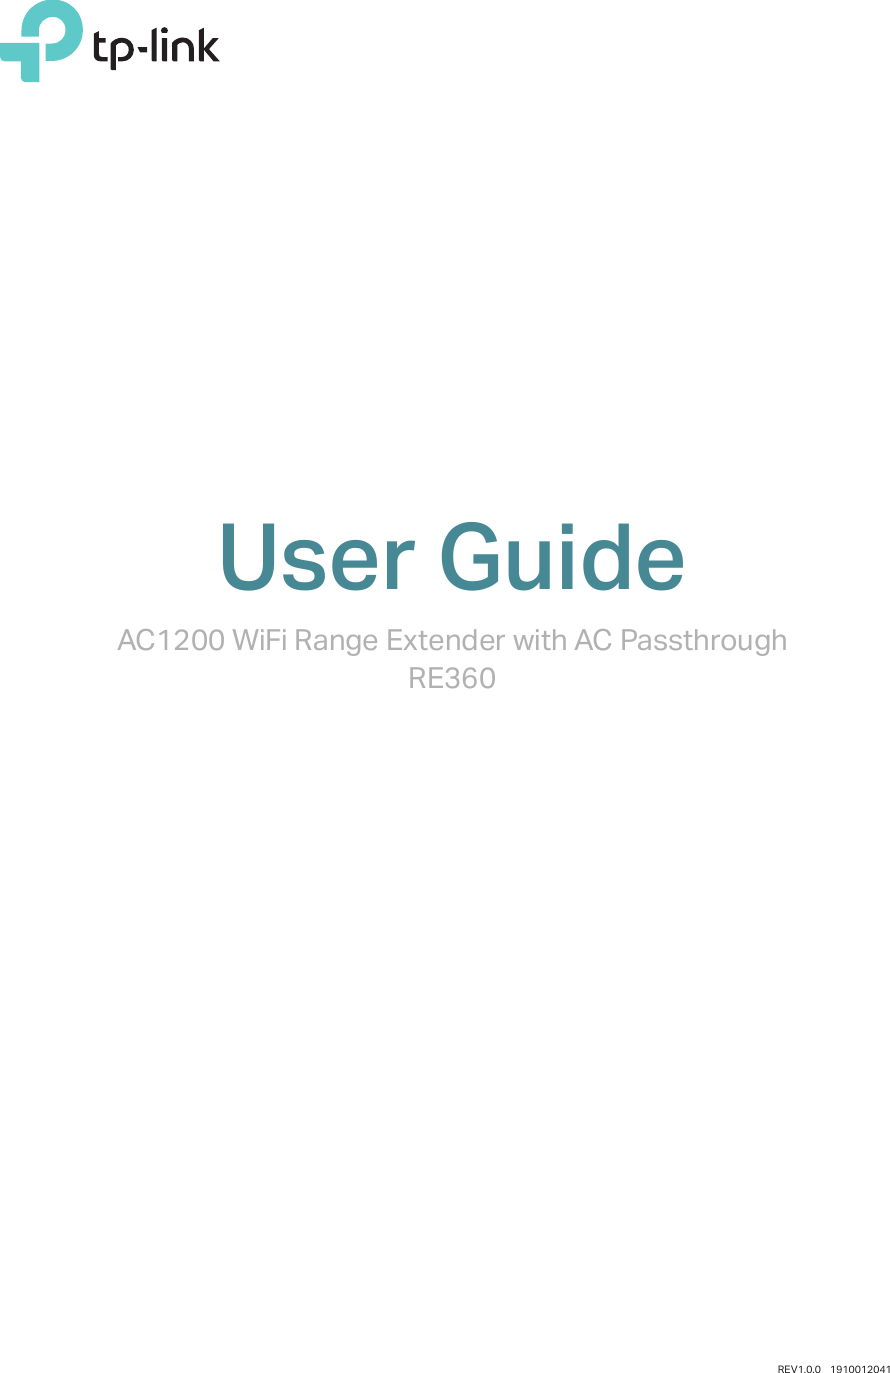 User GuideAC1200 WiFi Range Extender with AC PassthroughRE360REV1.0.0    1910012041